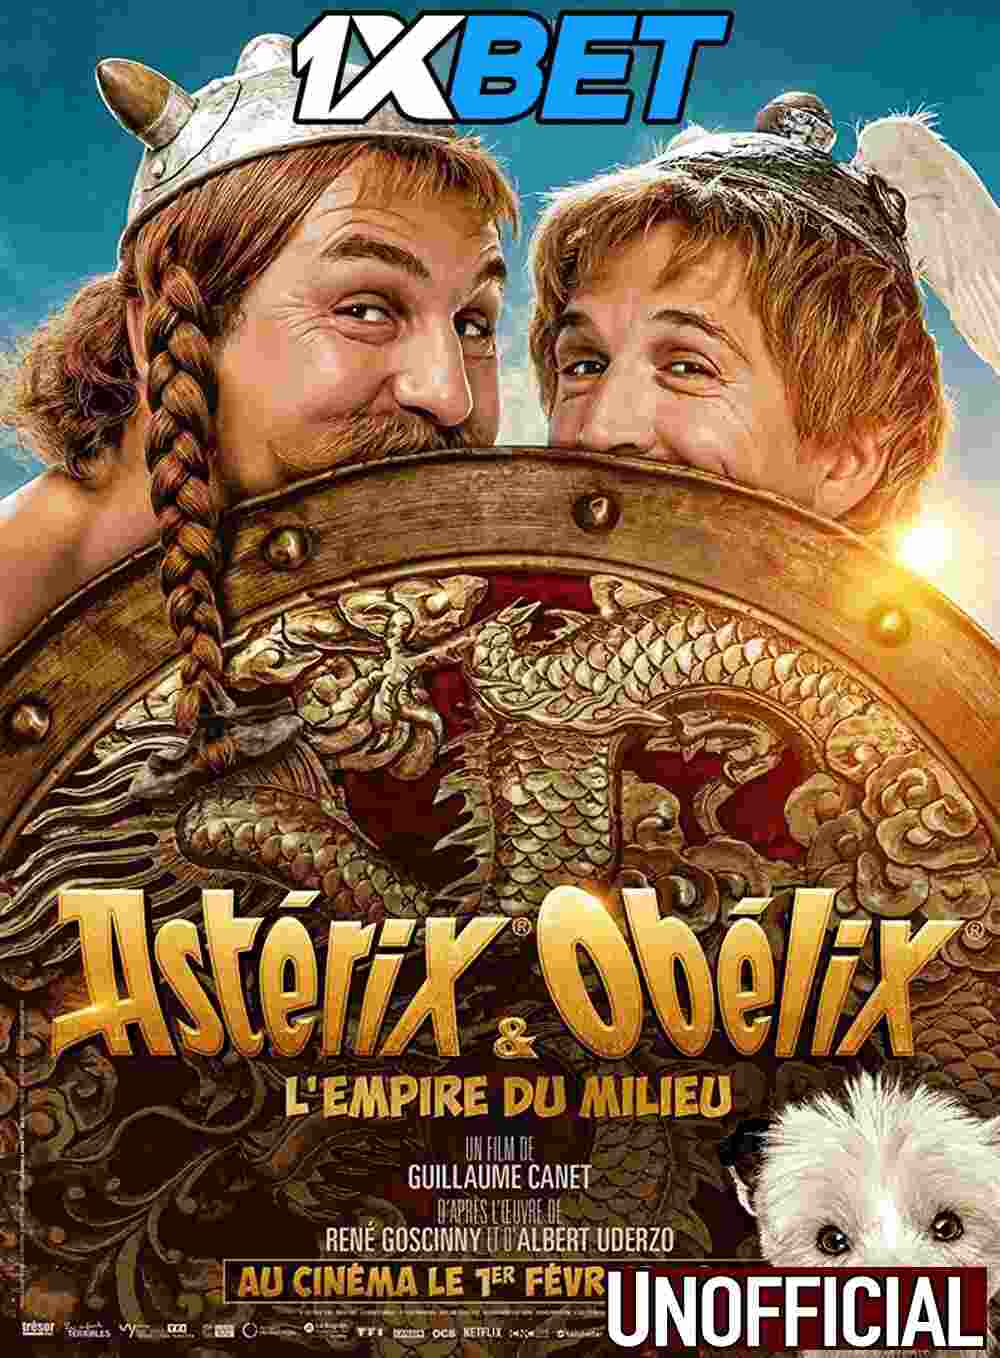 Watch Asterix & Obelix: The Middle Kingdom (2023) Full Movie [In French] With Hindi Subtitles  CAMRip 720p Online Stream – 1XBET